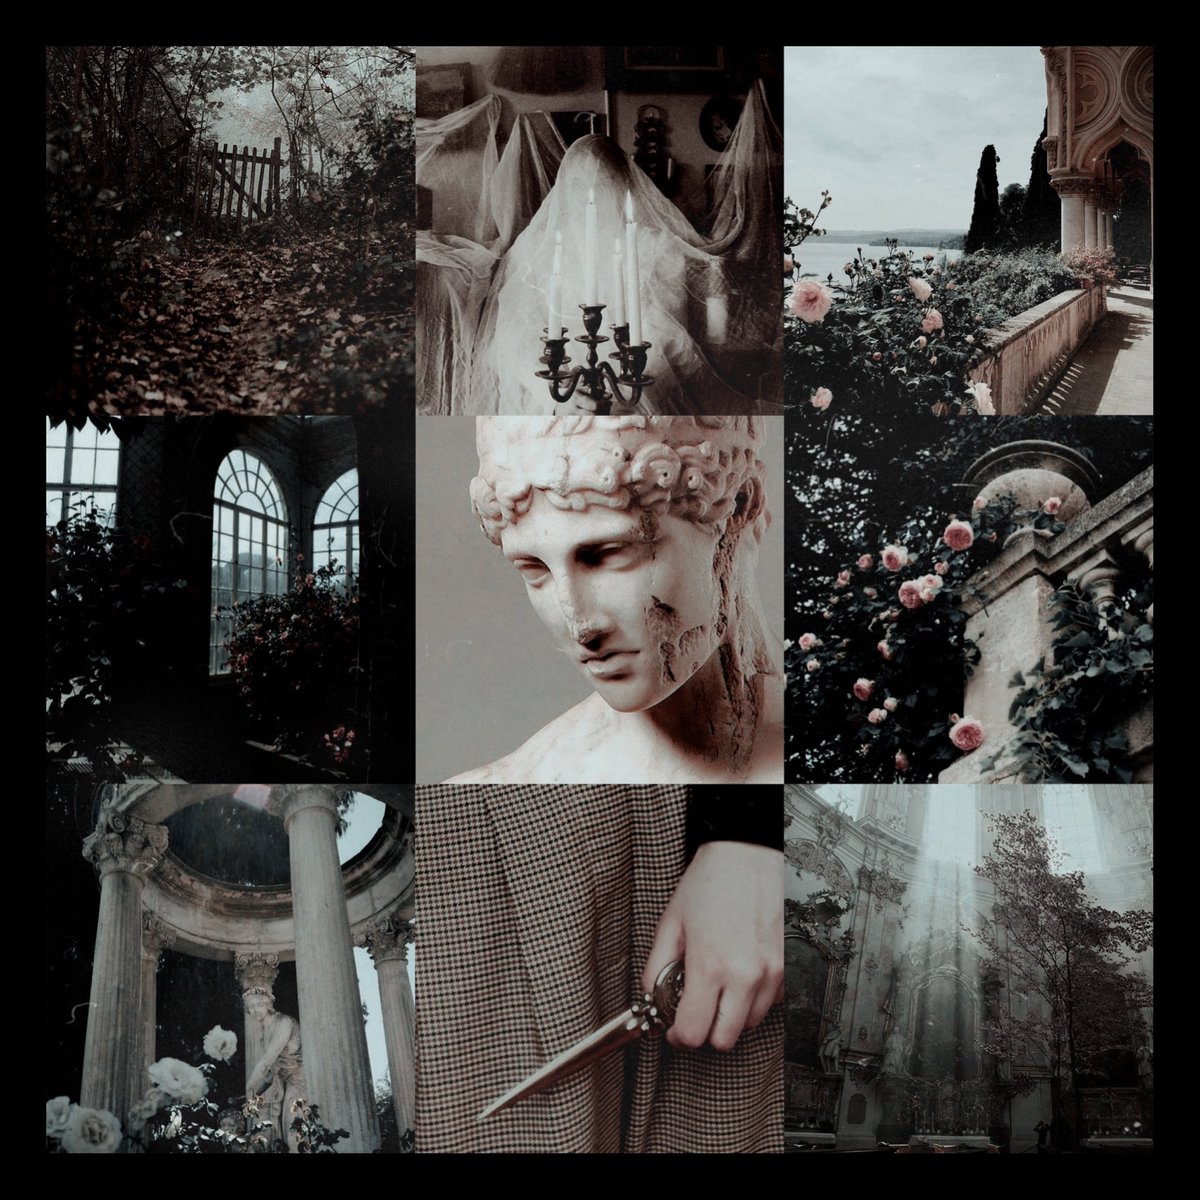 — 𝙫𝙞𝙘𝙩𝙤𝙧𝙞𝙖𝙣 - tributes are sent in wearing button ups, black pants, and low dress shoes.- cornucopia is inside of a victorian building.- threats: statues, structured buildings falling, ponies.